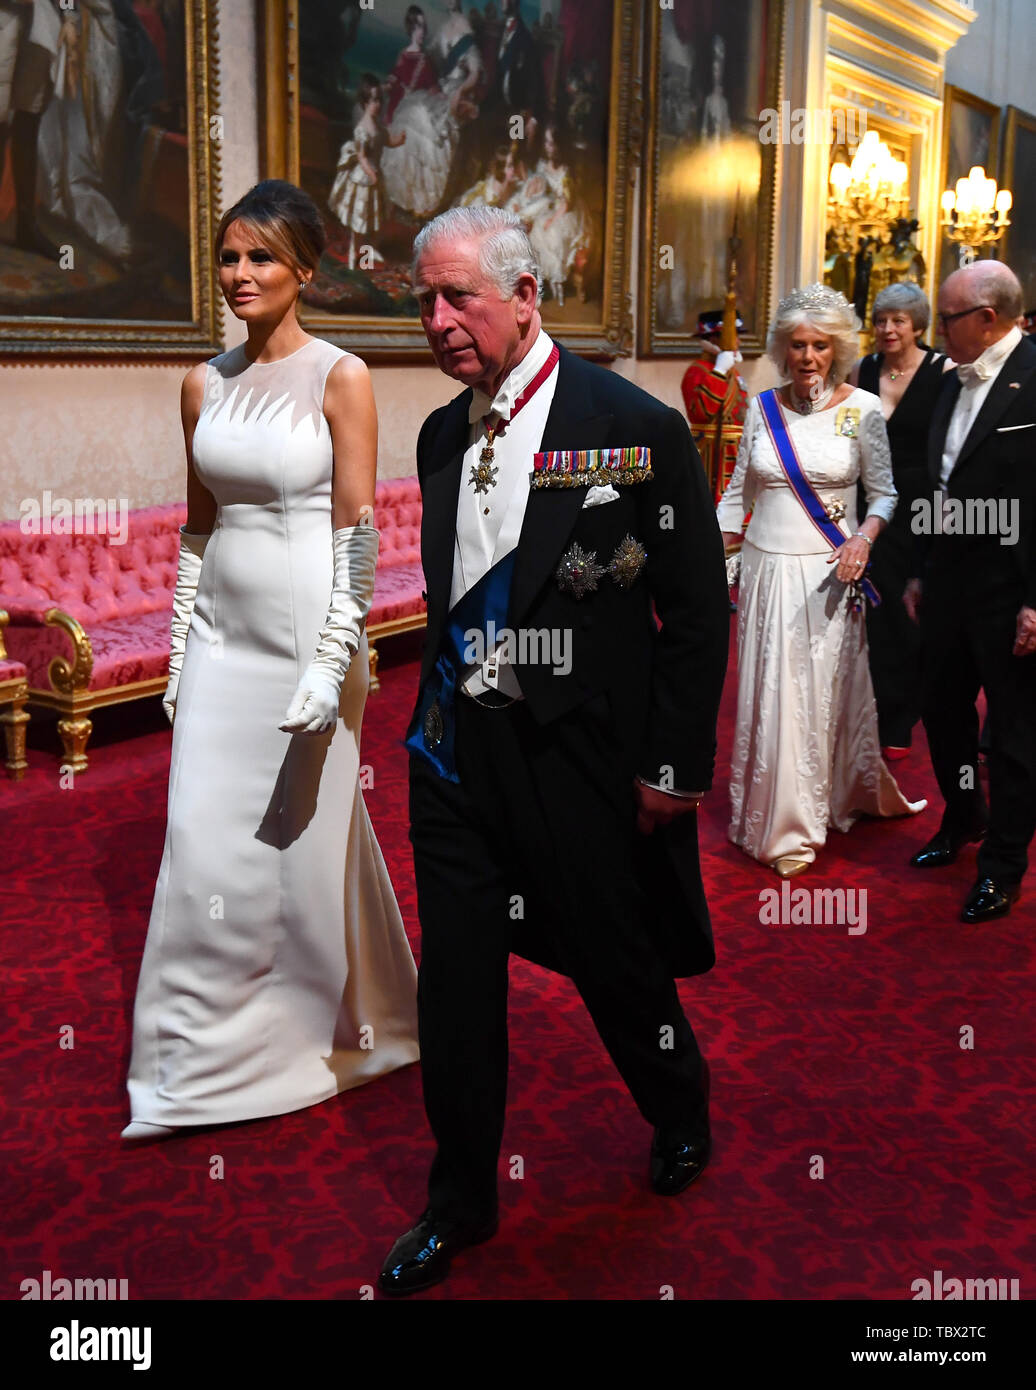 Melania Trump and the Prince of Wales arrive through the East Gallery during the State Banquet at Buckingham Palace, London, on day one of the US President's three day state visit to the UK. Stock Photo